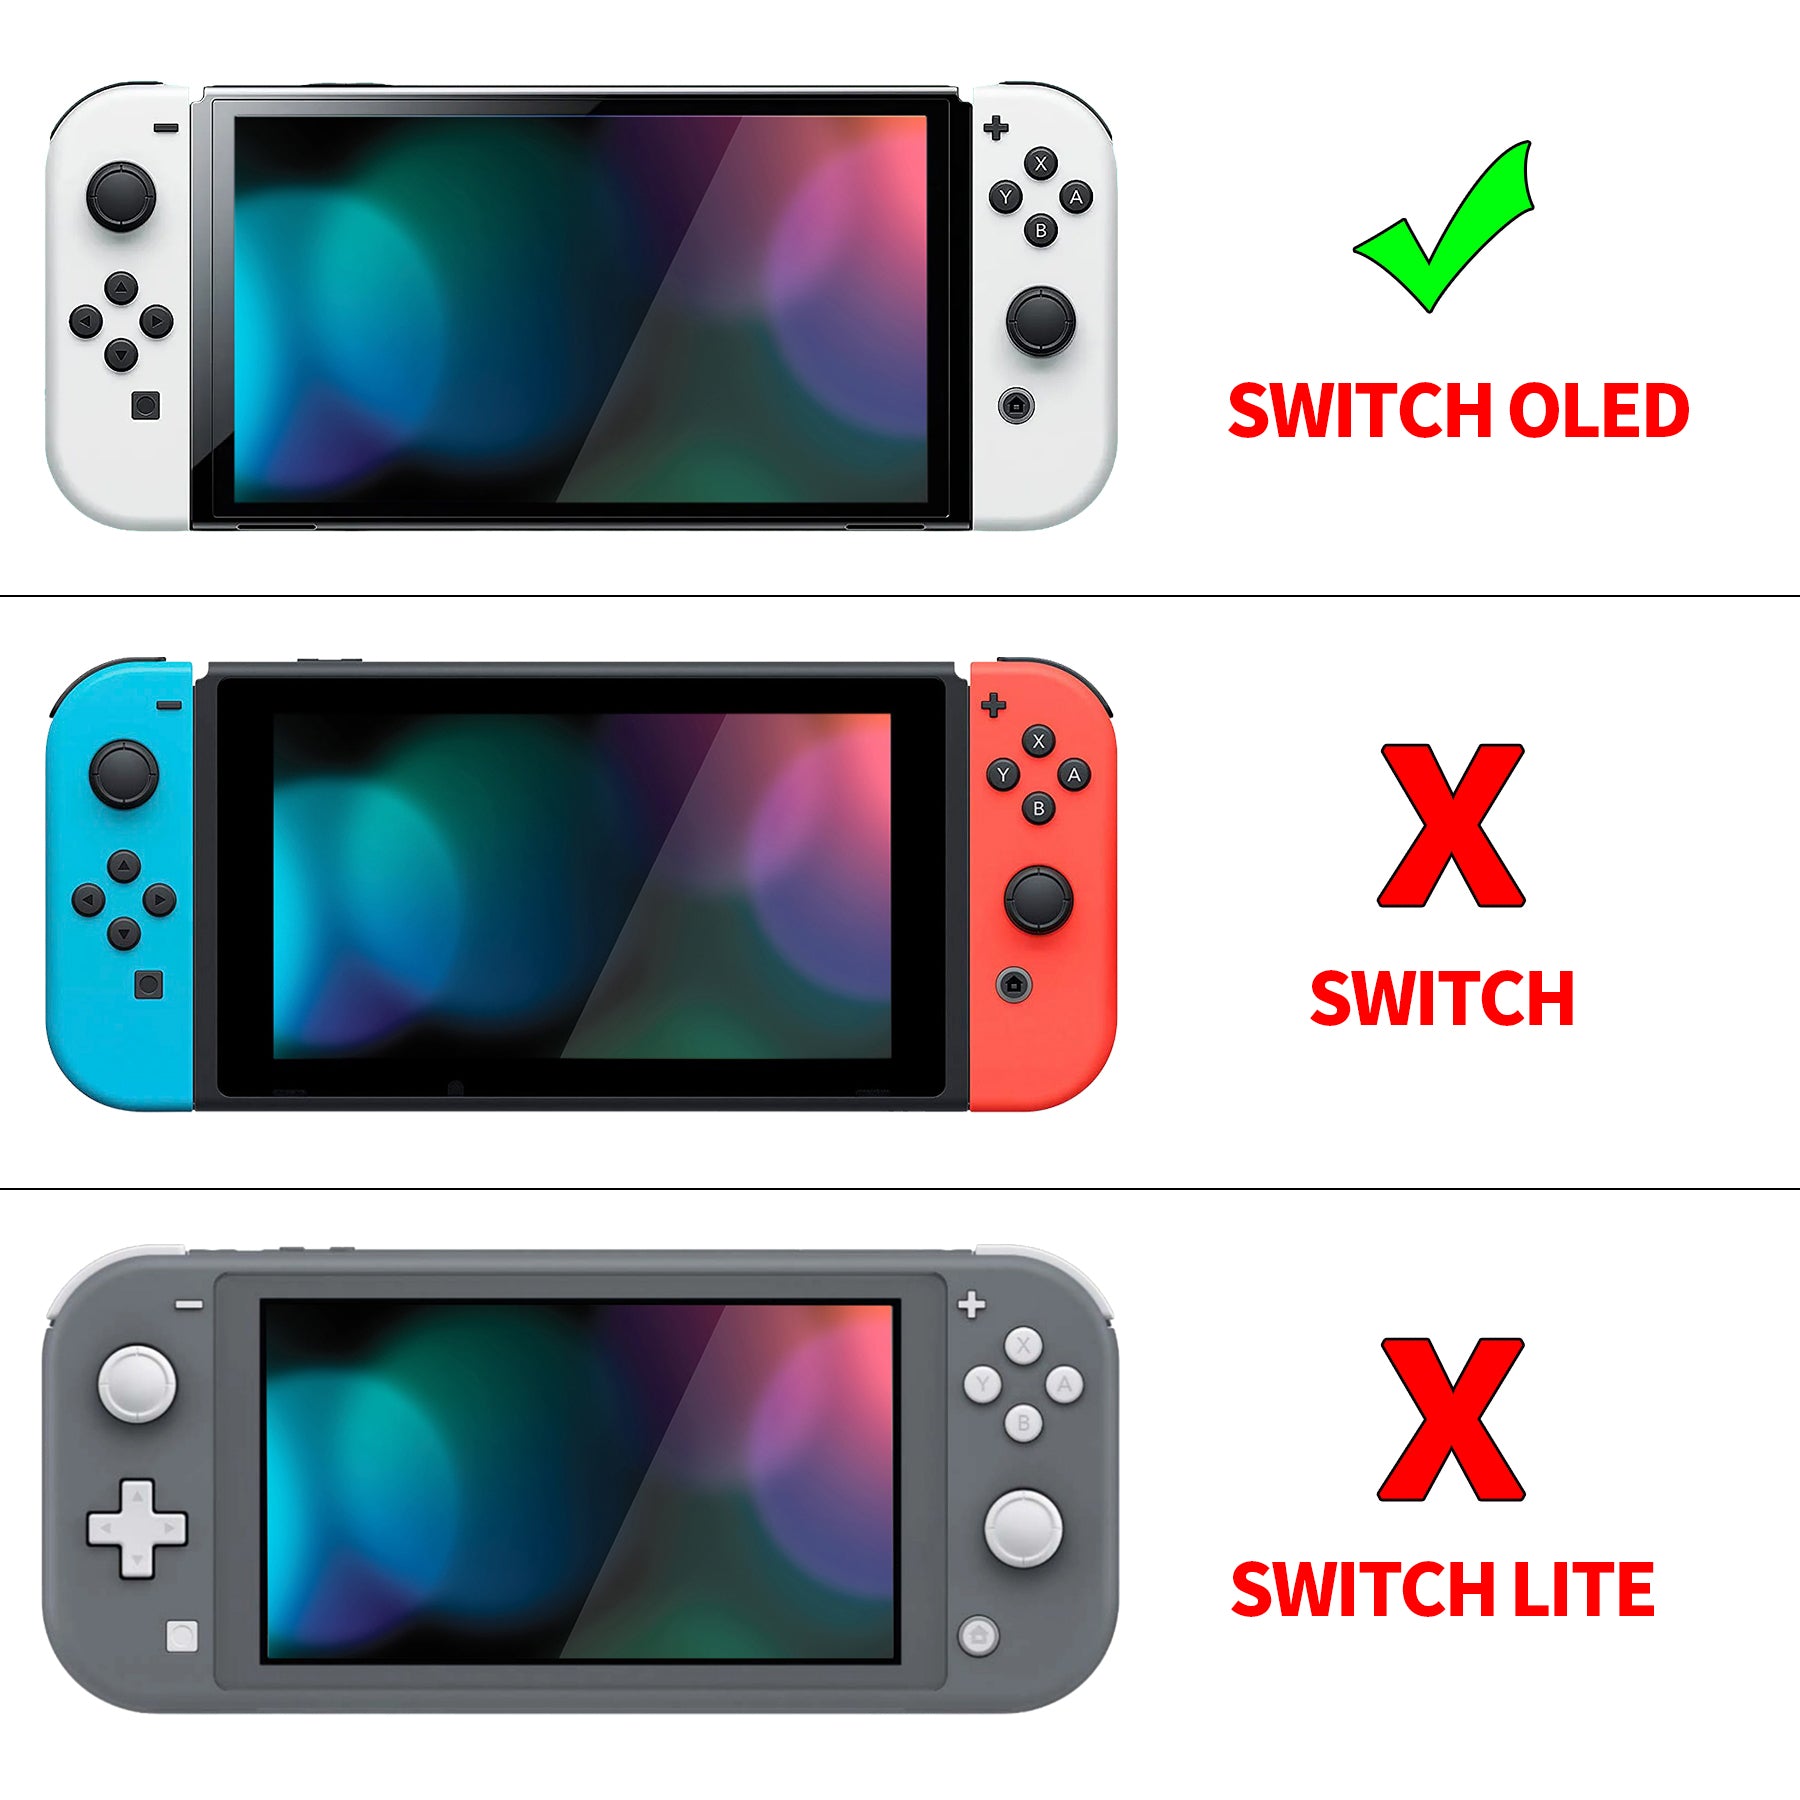 PlayVital ZealProtect Soft Protective Case for Switch OLED, Flexible Protector Joycon Grip Cover for Switch OLED with Thumb Grip Caps & ABXY Direction Button Caps - Candy Rainbow Unicorn - XSOYV6007 playvital